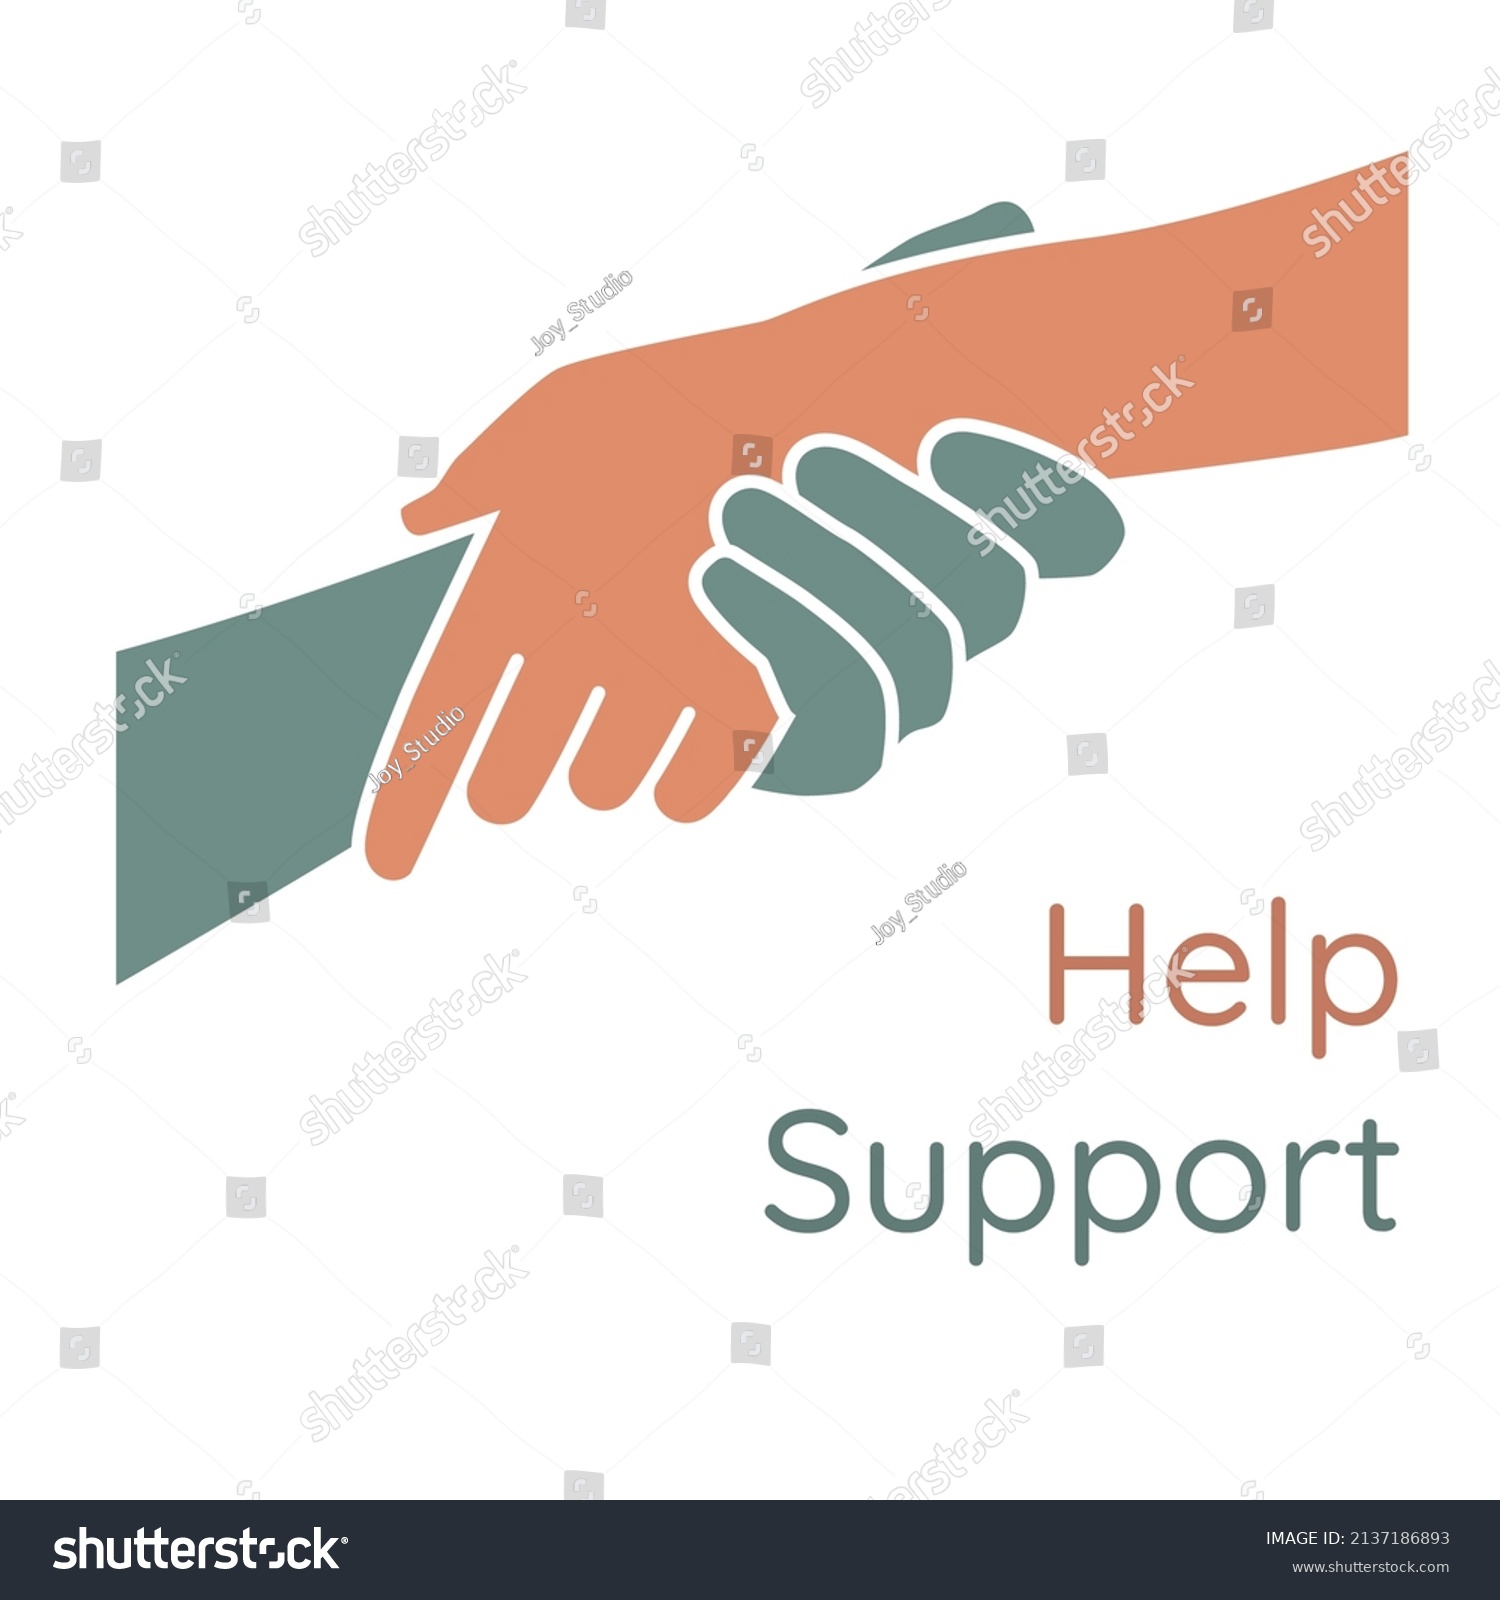 Helping hand concept. Gesture, sign of help and hope. Two hands taking each other. #2137186893